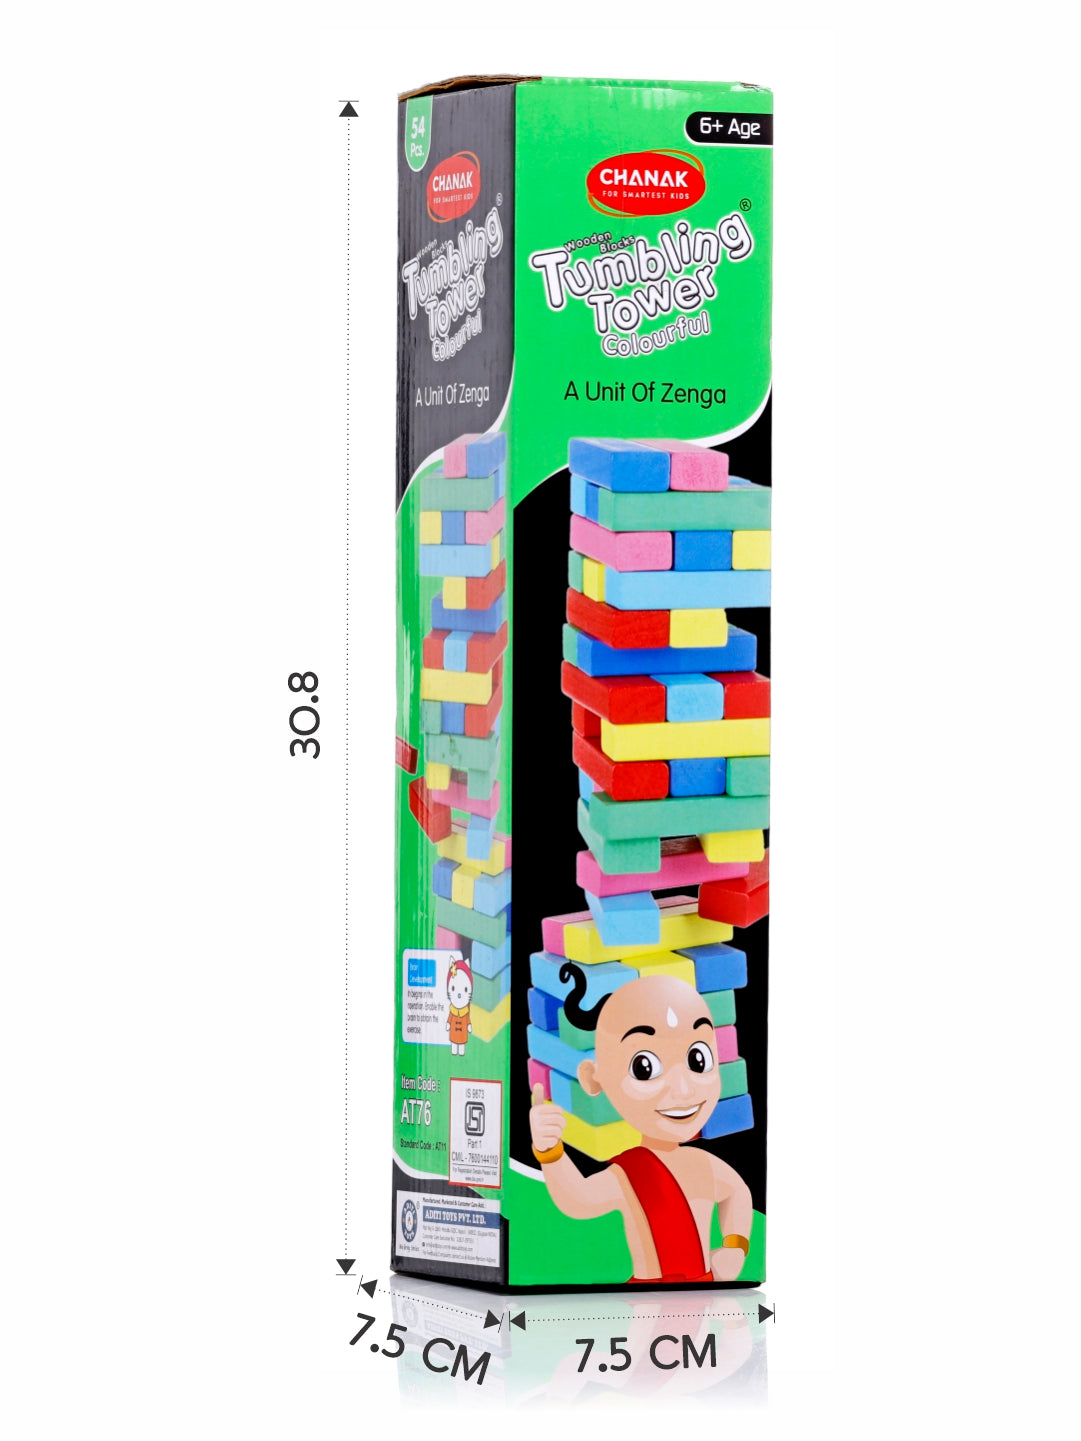 Colorful Wooden Tumbling Tower Game Jenga / Zenga. Puzzle Game for Adults and Kids